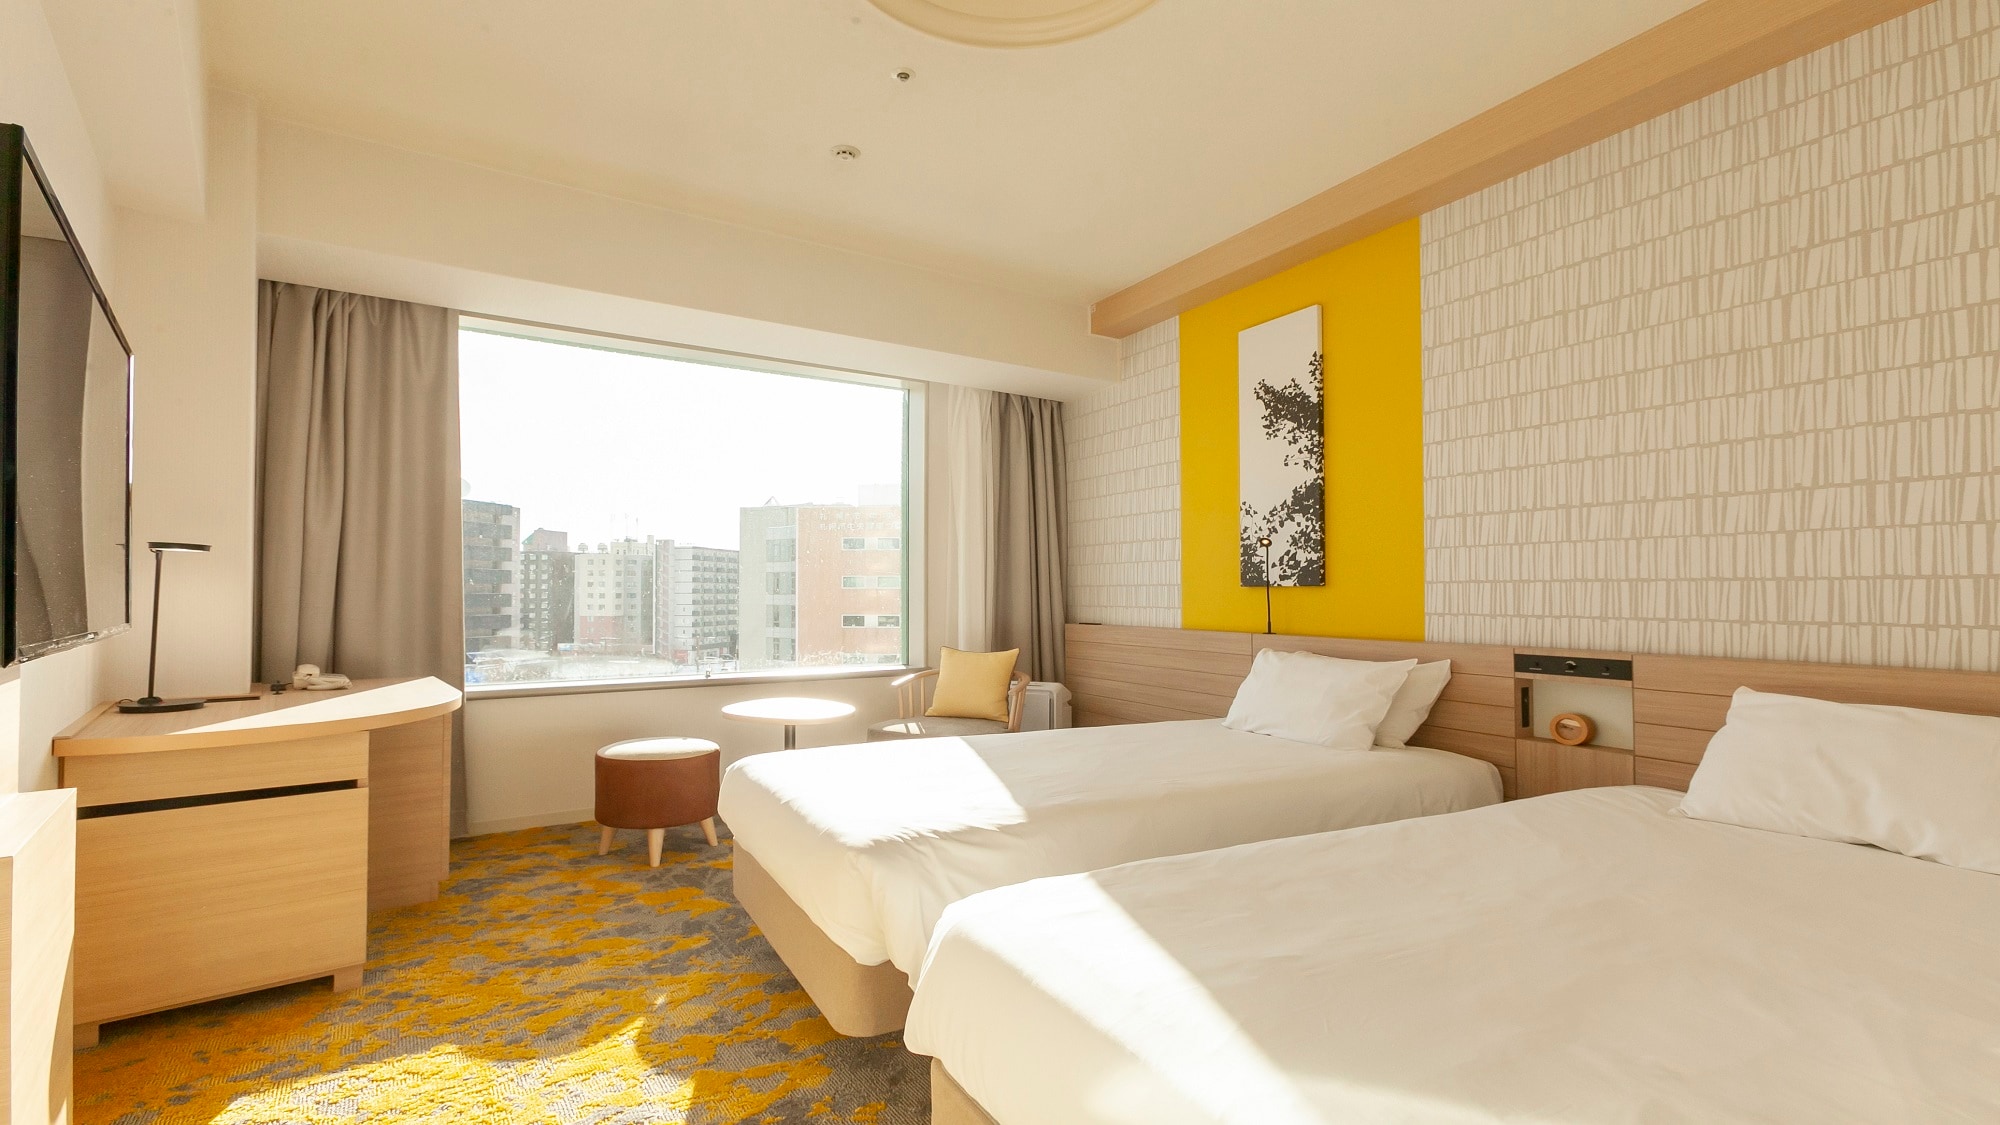 [Standard twin room (21㎡)] Standard floor (3rd to 12th floor) Spacious room even though it is standard